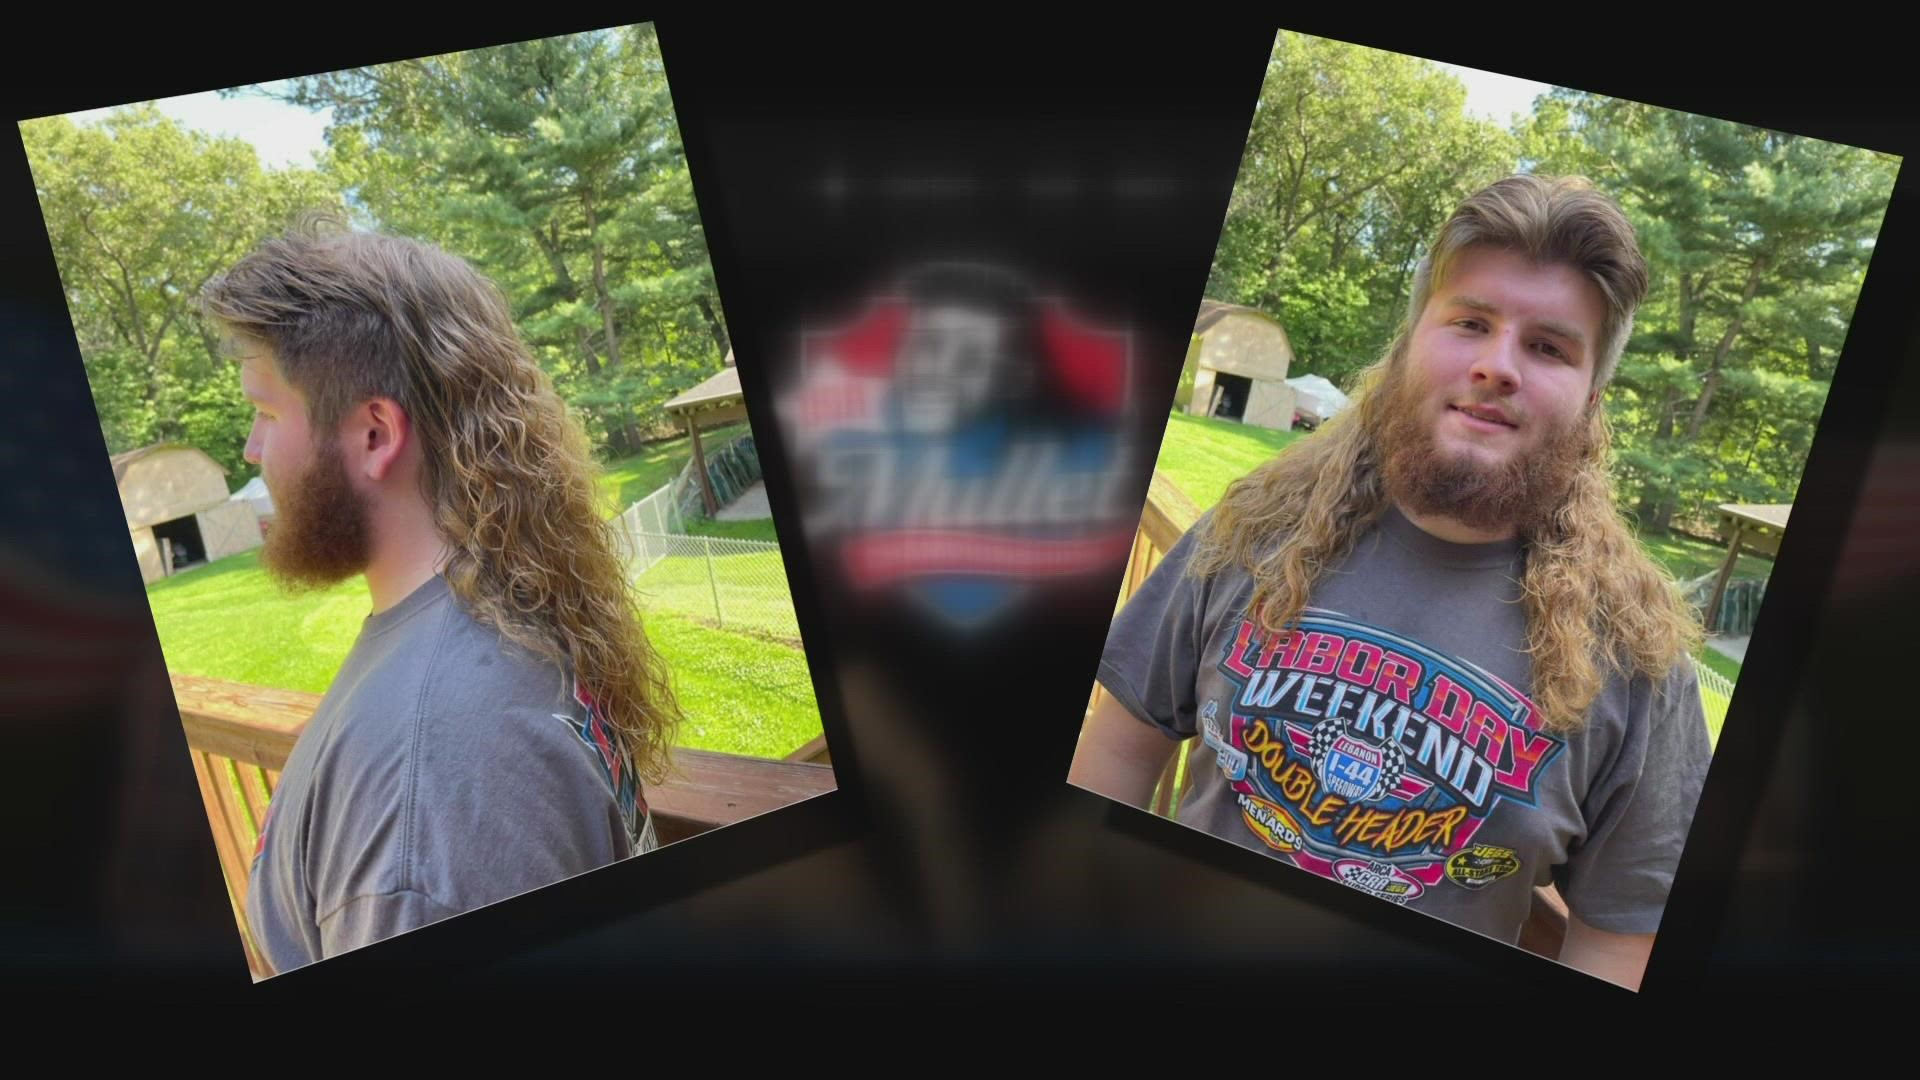 Playing the 'long' game isn't easy. Michigan's Carl Emerson and Anthony Woodring would know, as they each hope to win the USA Mullet Championship.